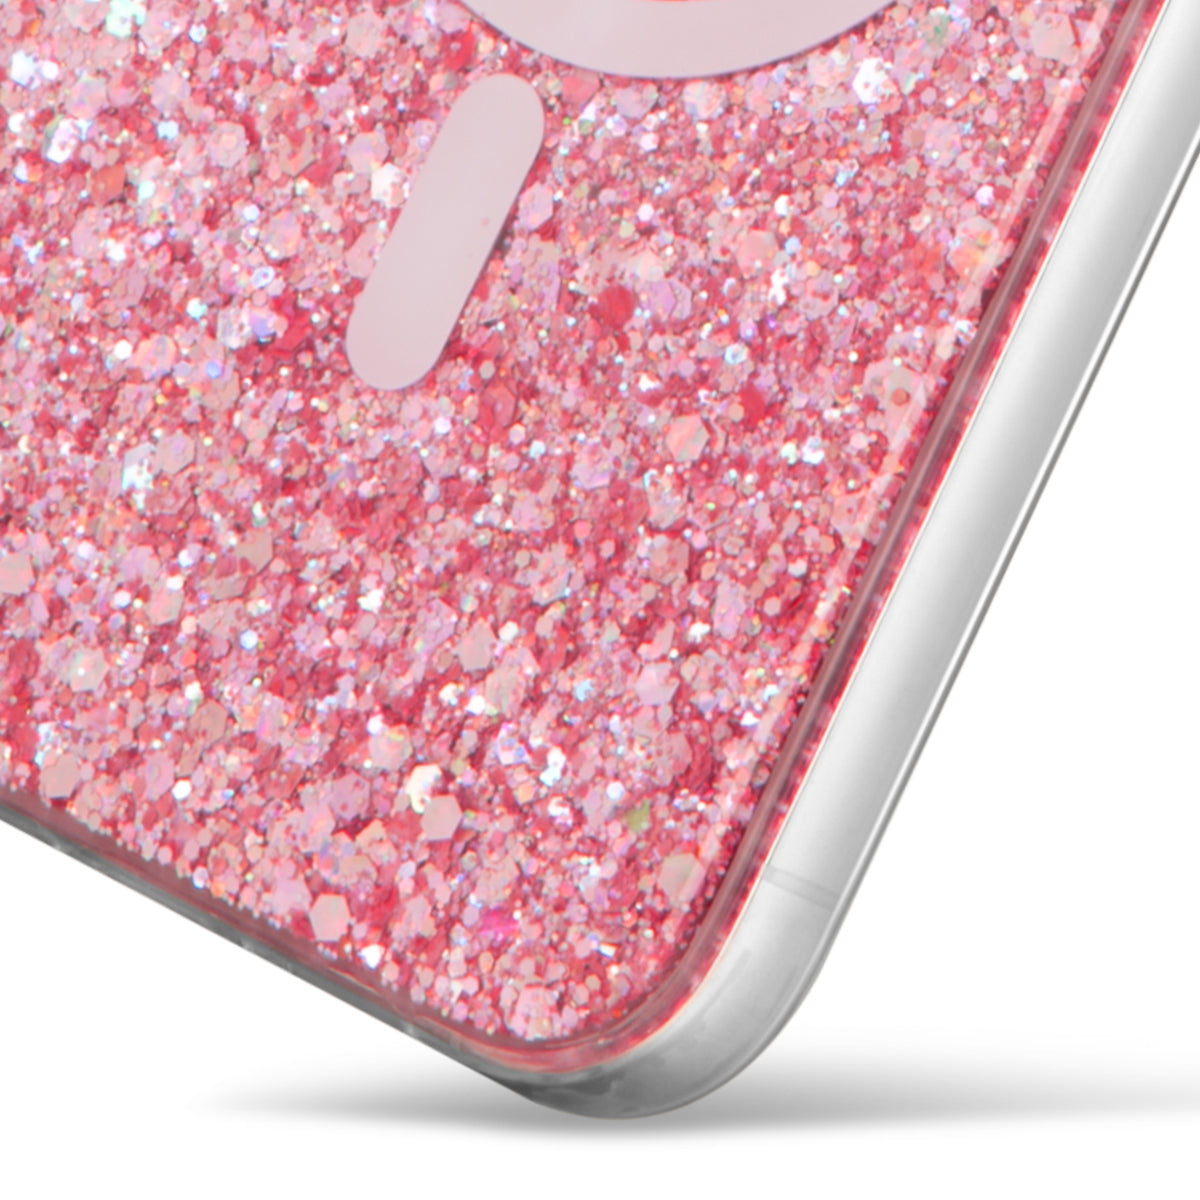 Showcase Slim Glam - iPhone 14 Pro Max/ 13 Pro Max Baby Pink w/ MagSafe Phone Case